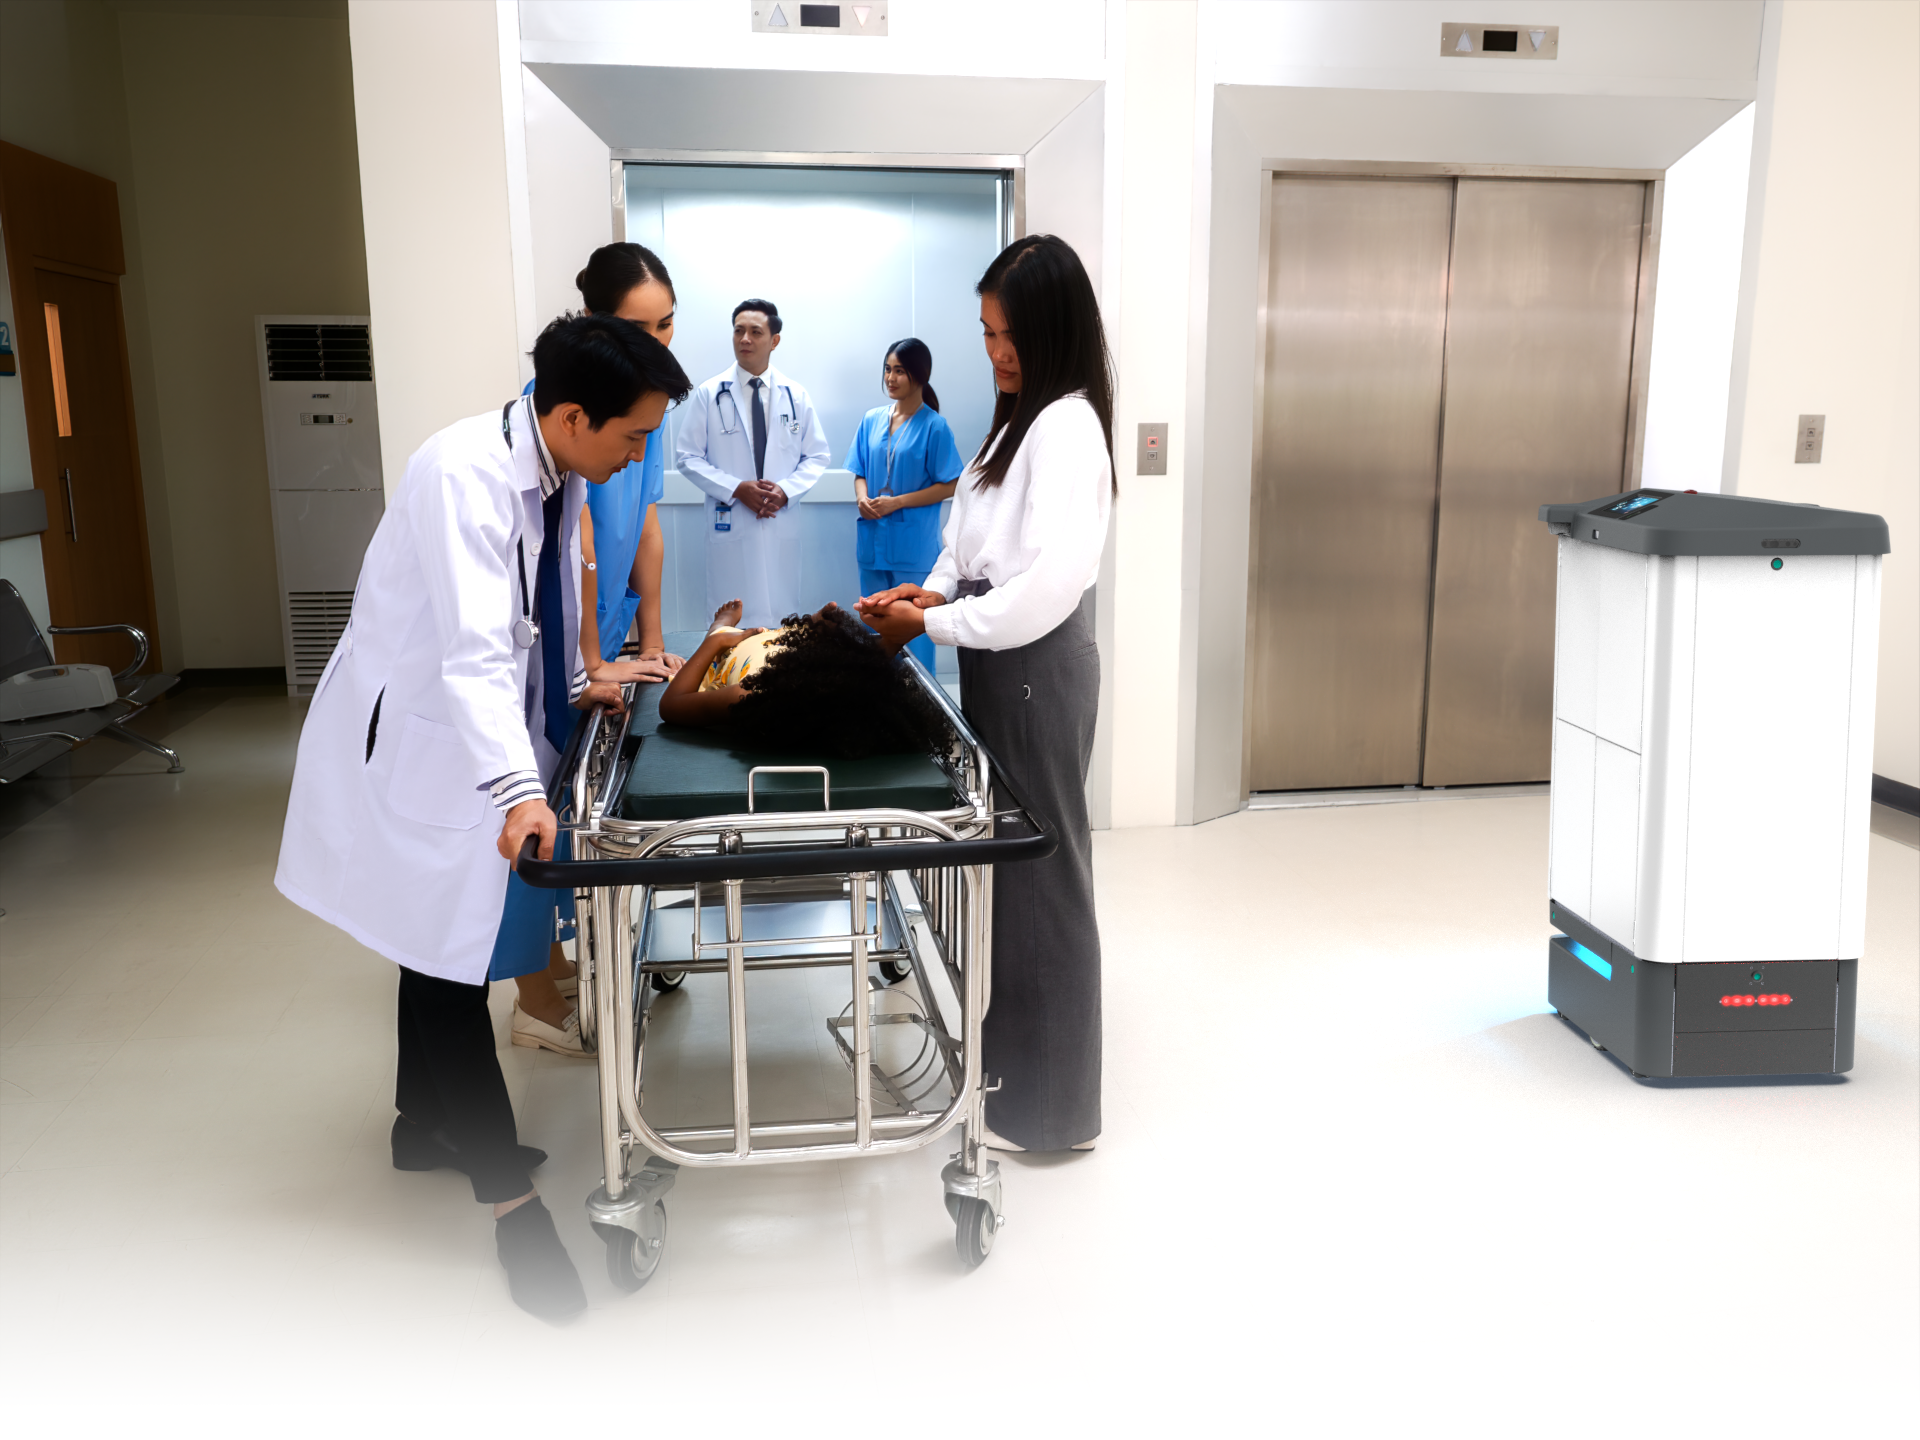 Robots in Hospitals and Healtcare Robots from Aethon | Tug Robot Hospital